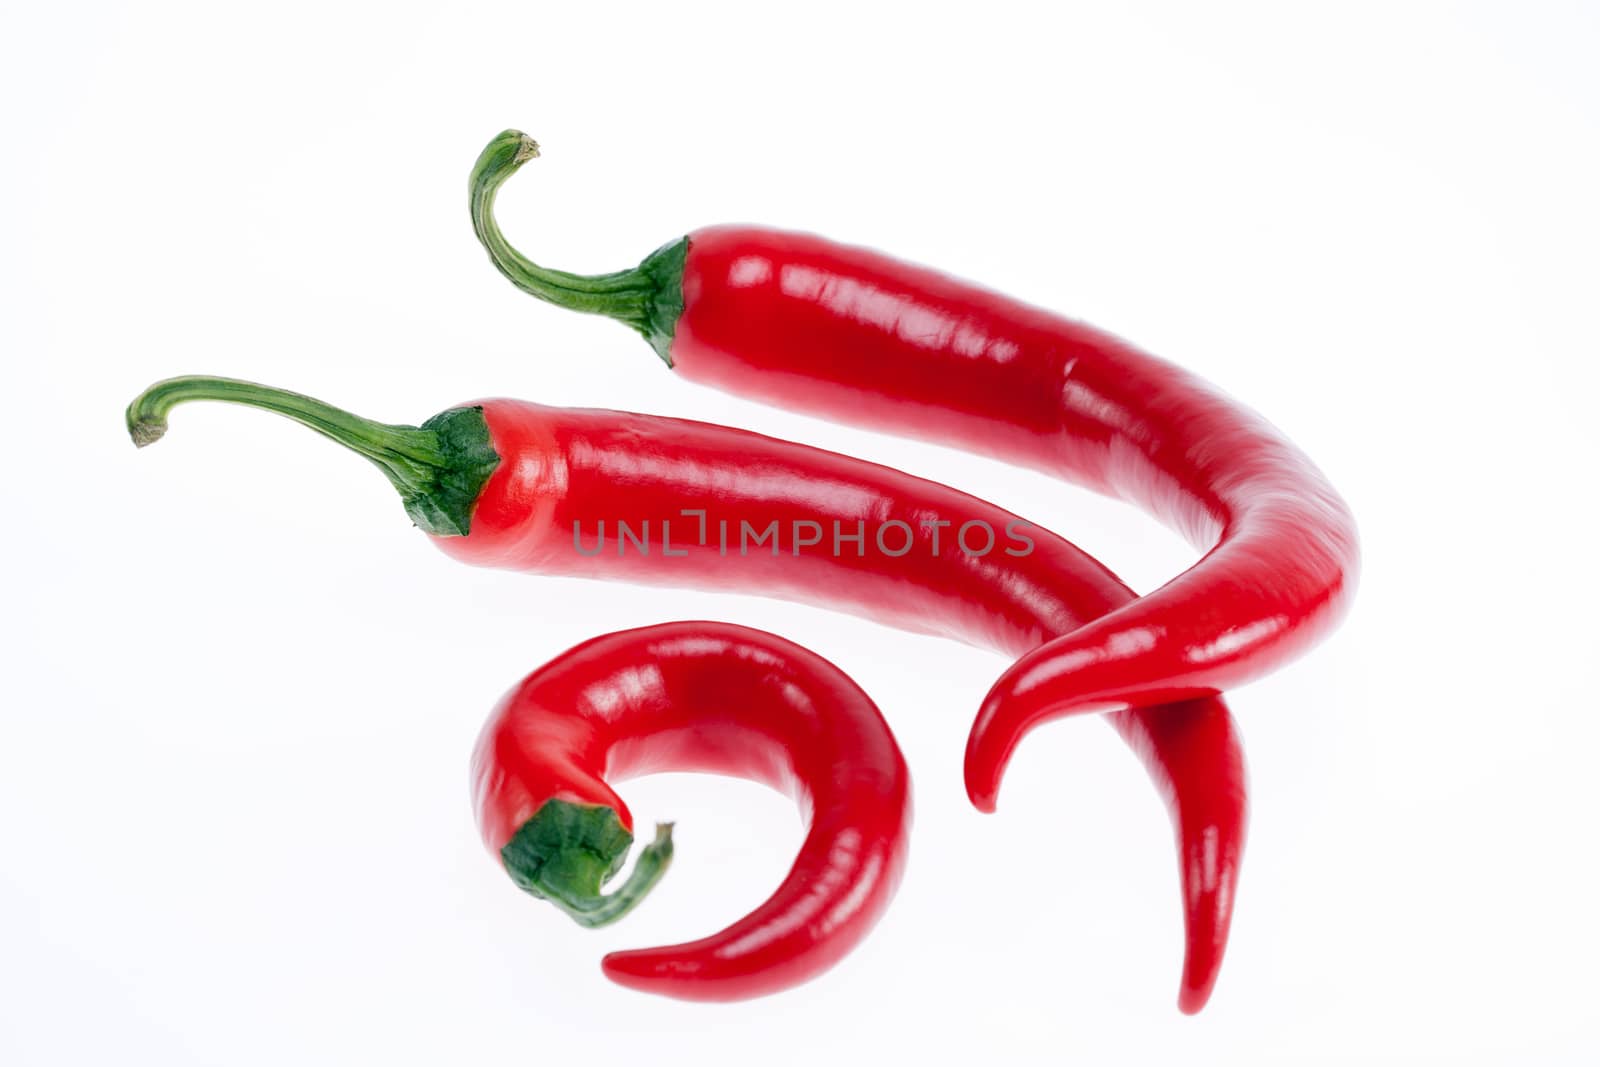 red peperoni peppers isolated on white background